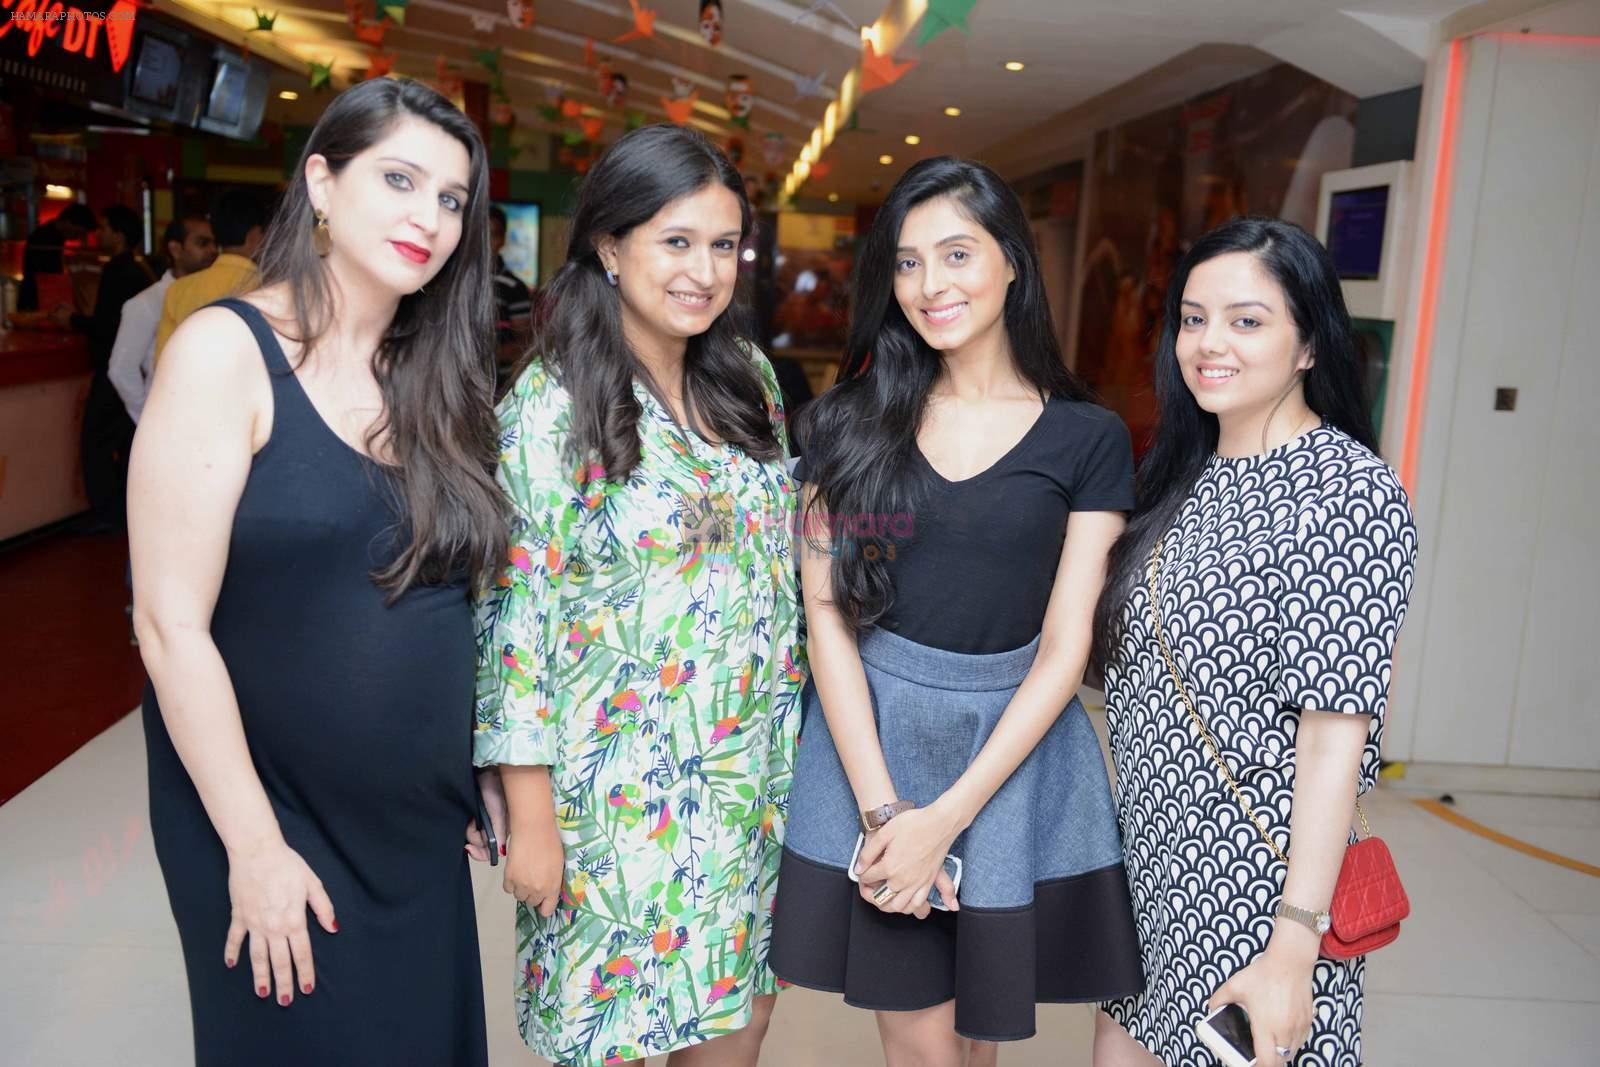 Perina Qureshi's film screening for the fashion fraternity friends in Delhi on 9th Aug 2015